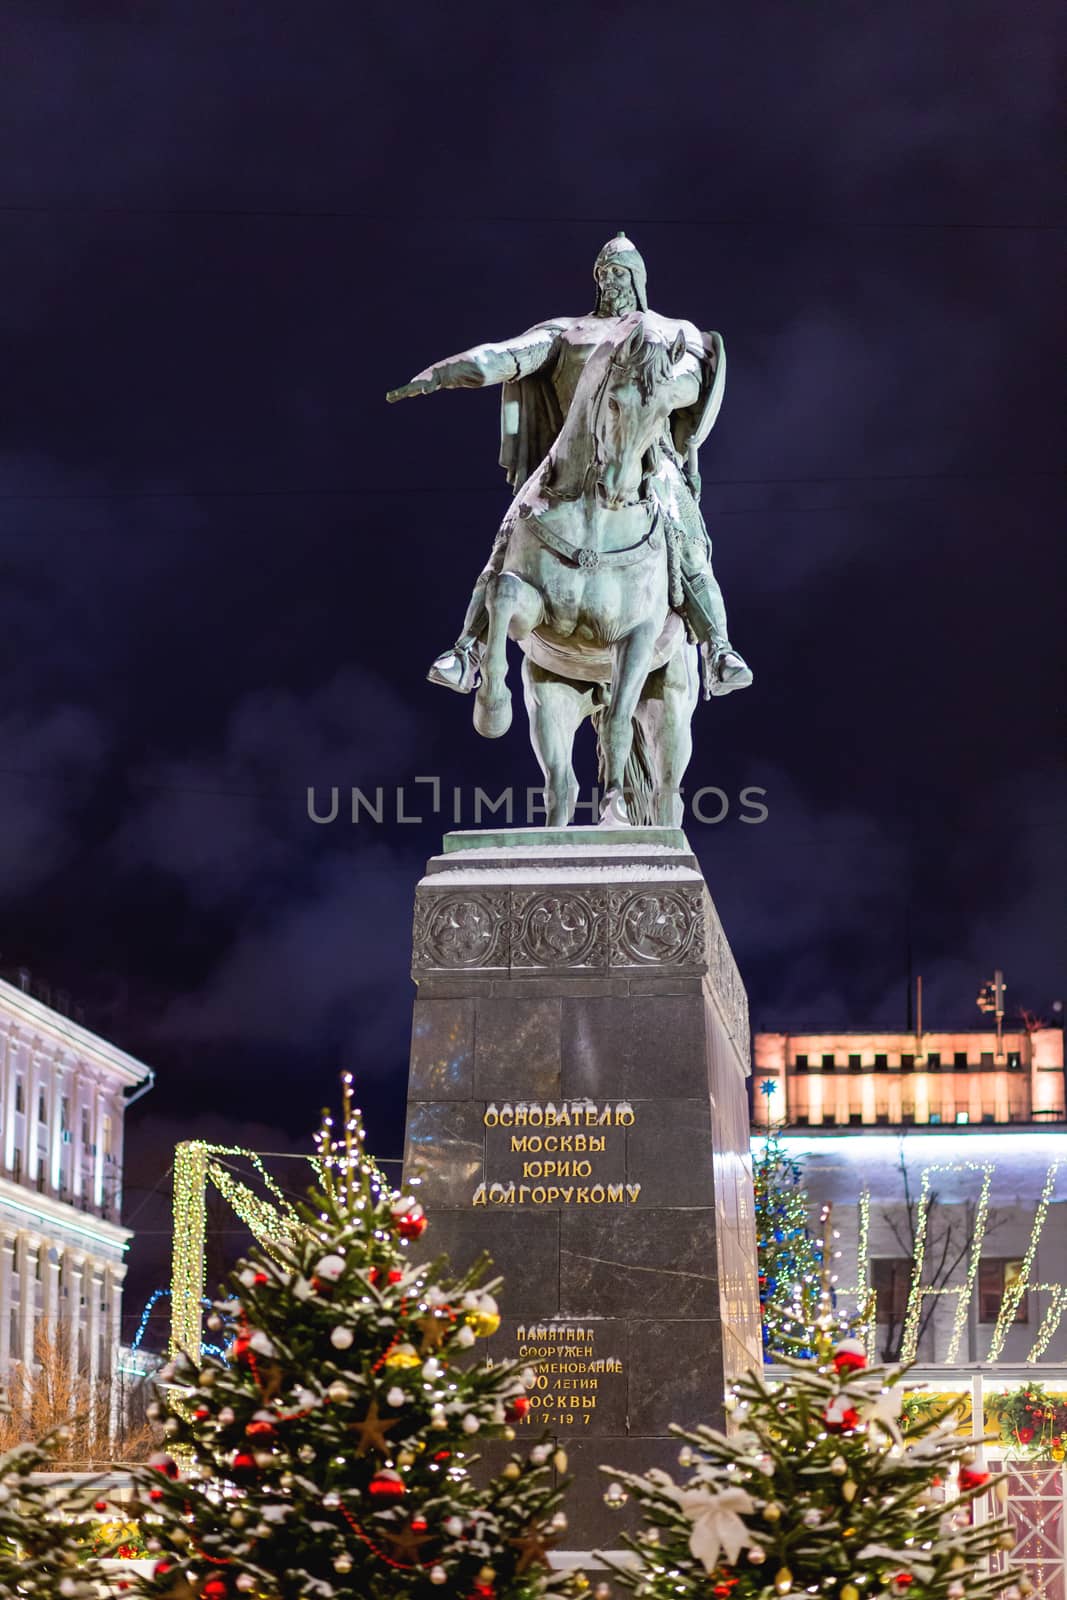 Monument to prince Yury Dolgorukiy, the founder of Moscow, on Tverskaya square (text on pedestal). Street decorated with light bulbs for New Year and Christmas celebration. Russia.